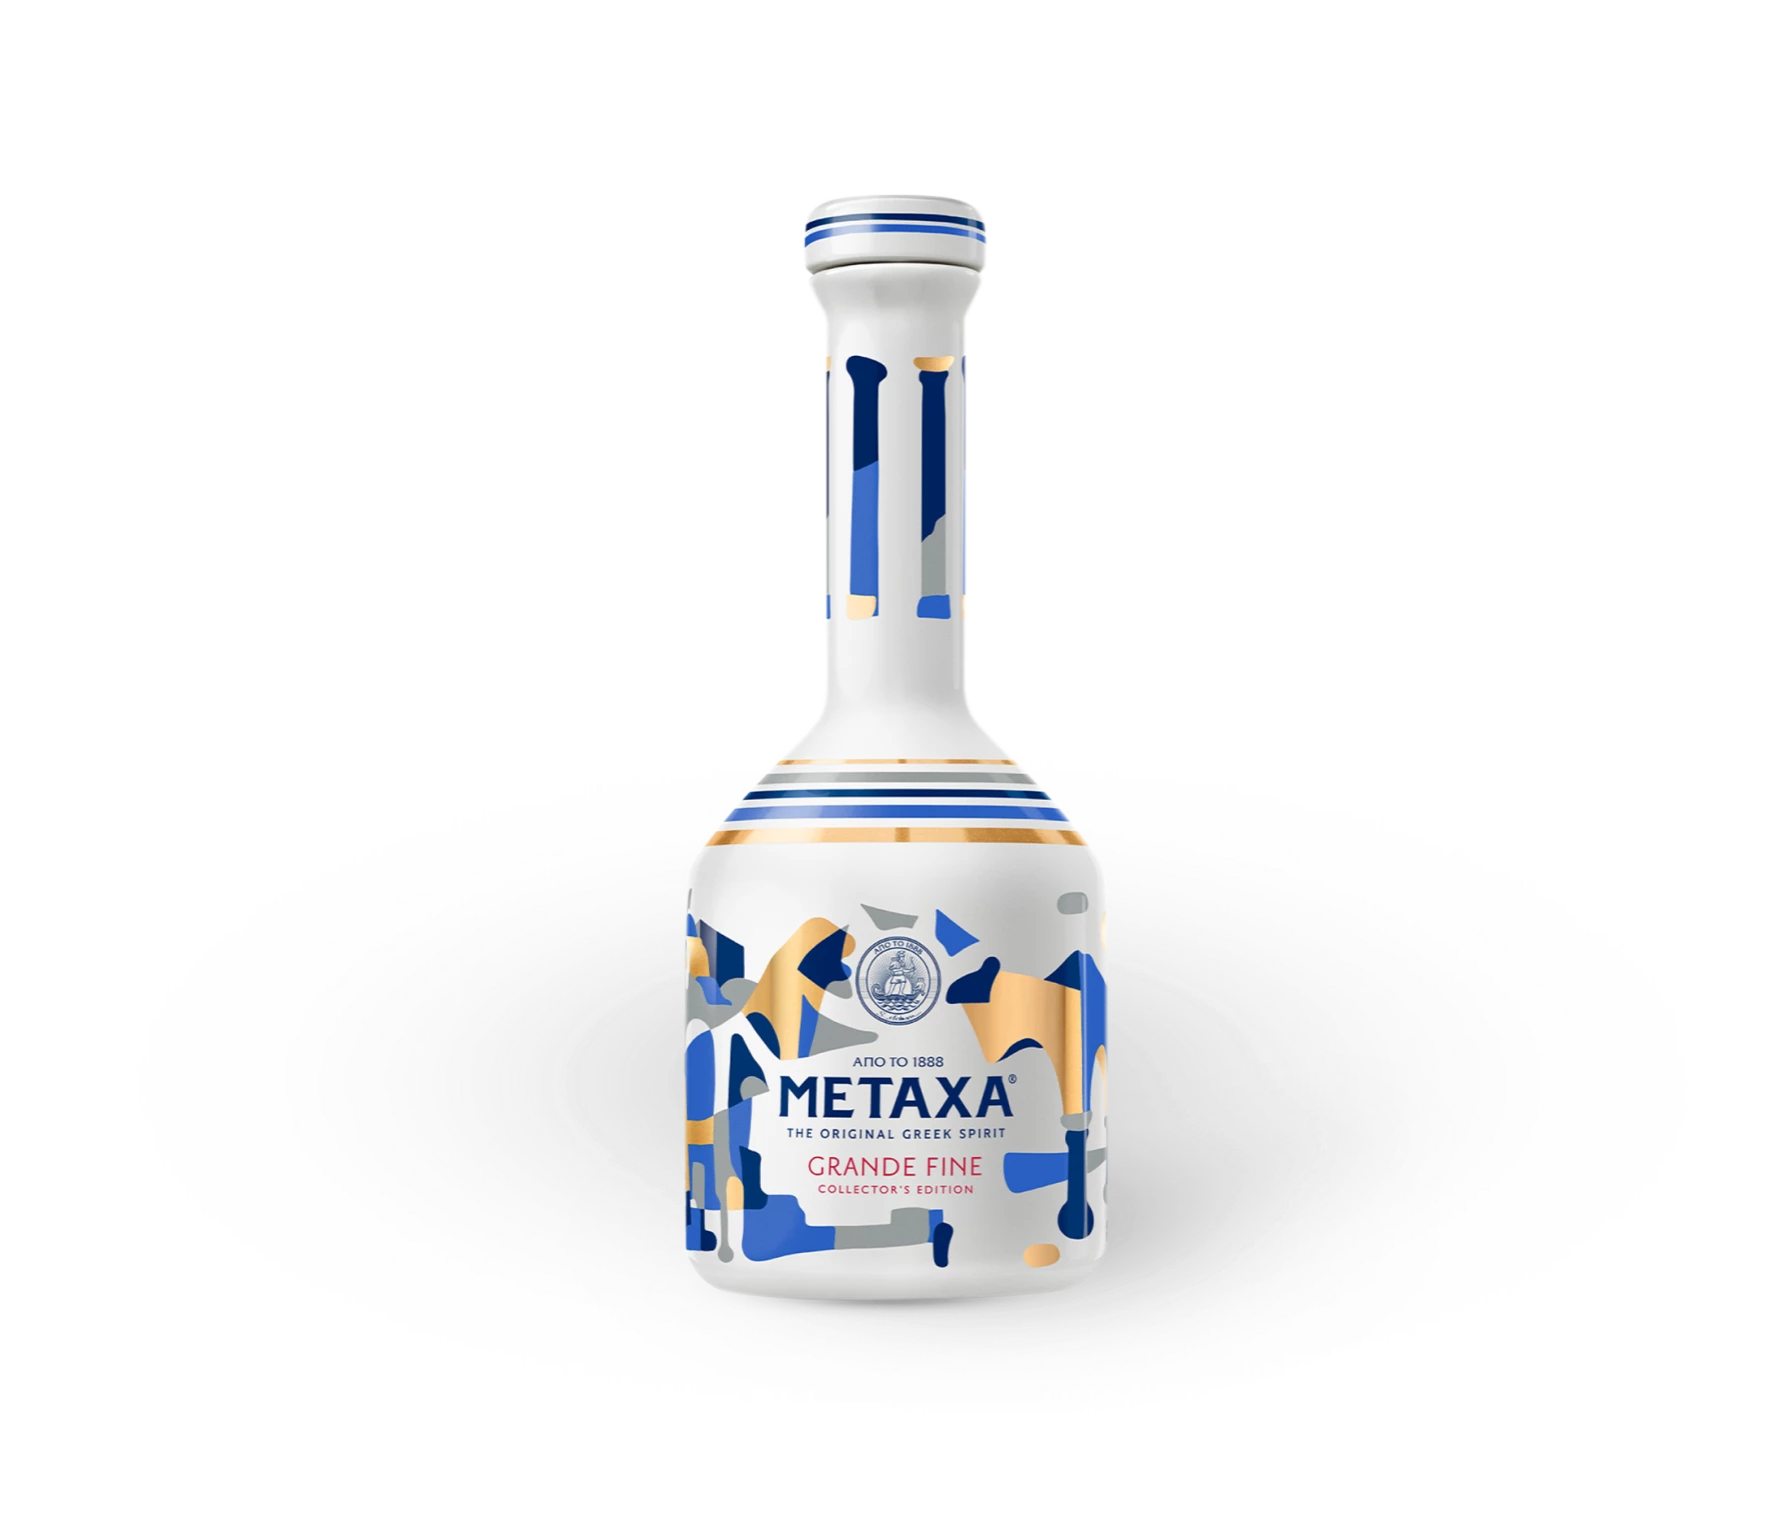 METAXA 12 Stars - spicy with dried fruit notes